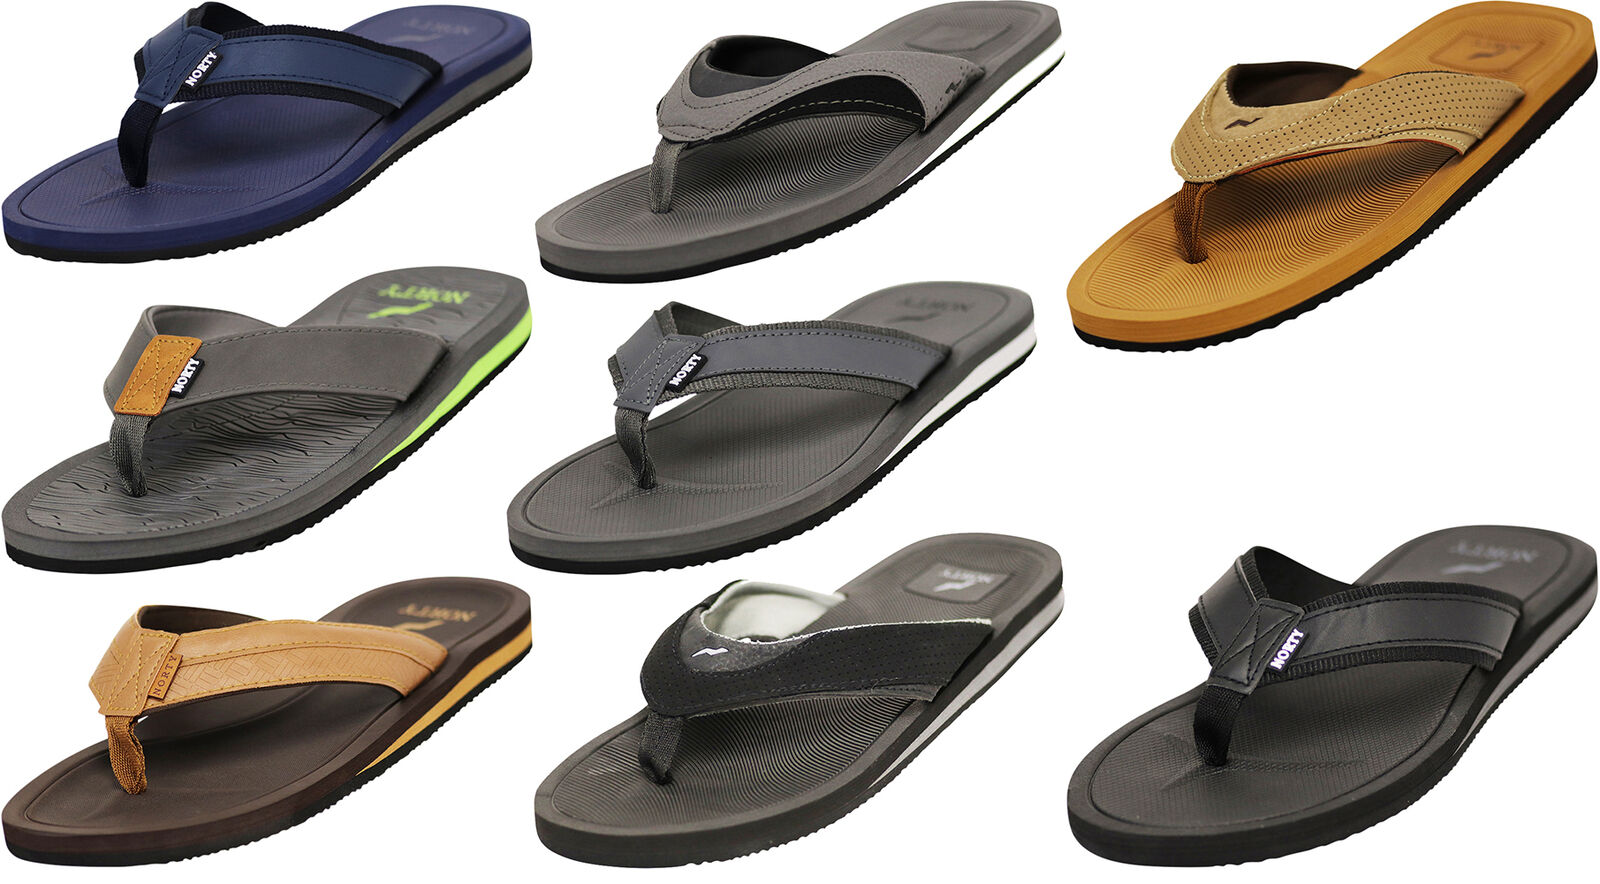 NORTY Mens Arch Support Flip Flops Adult Male Beach Thong Sandals